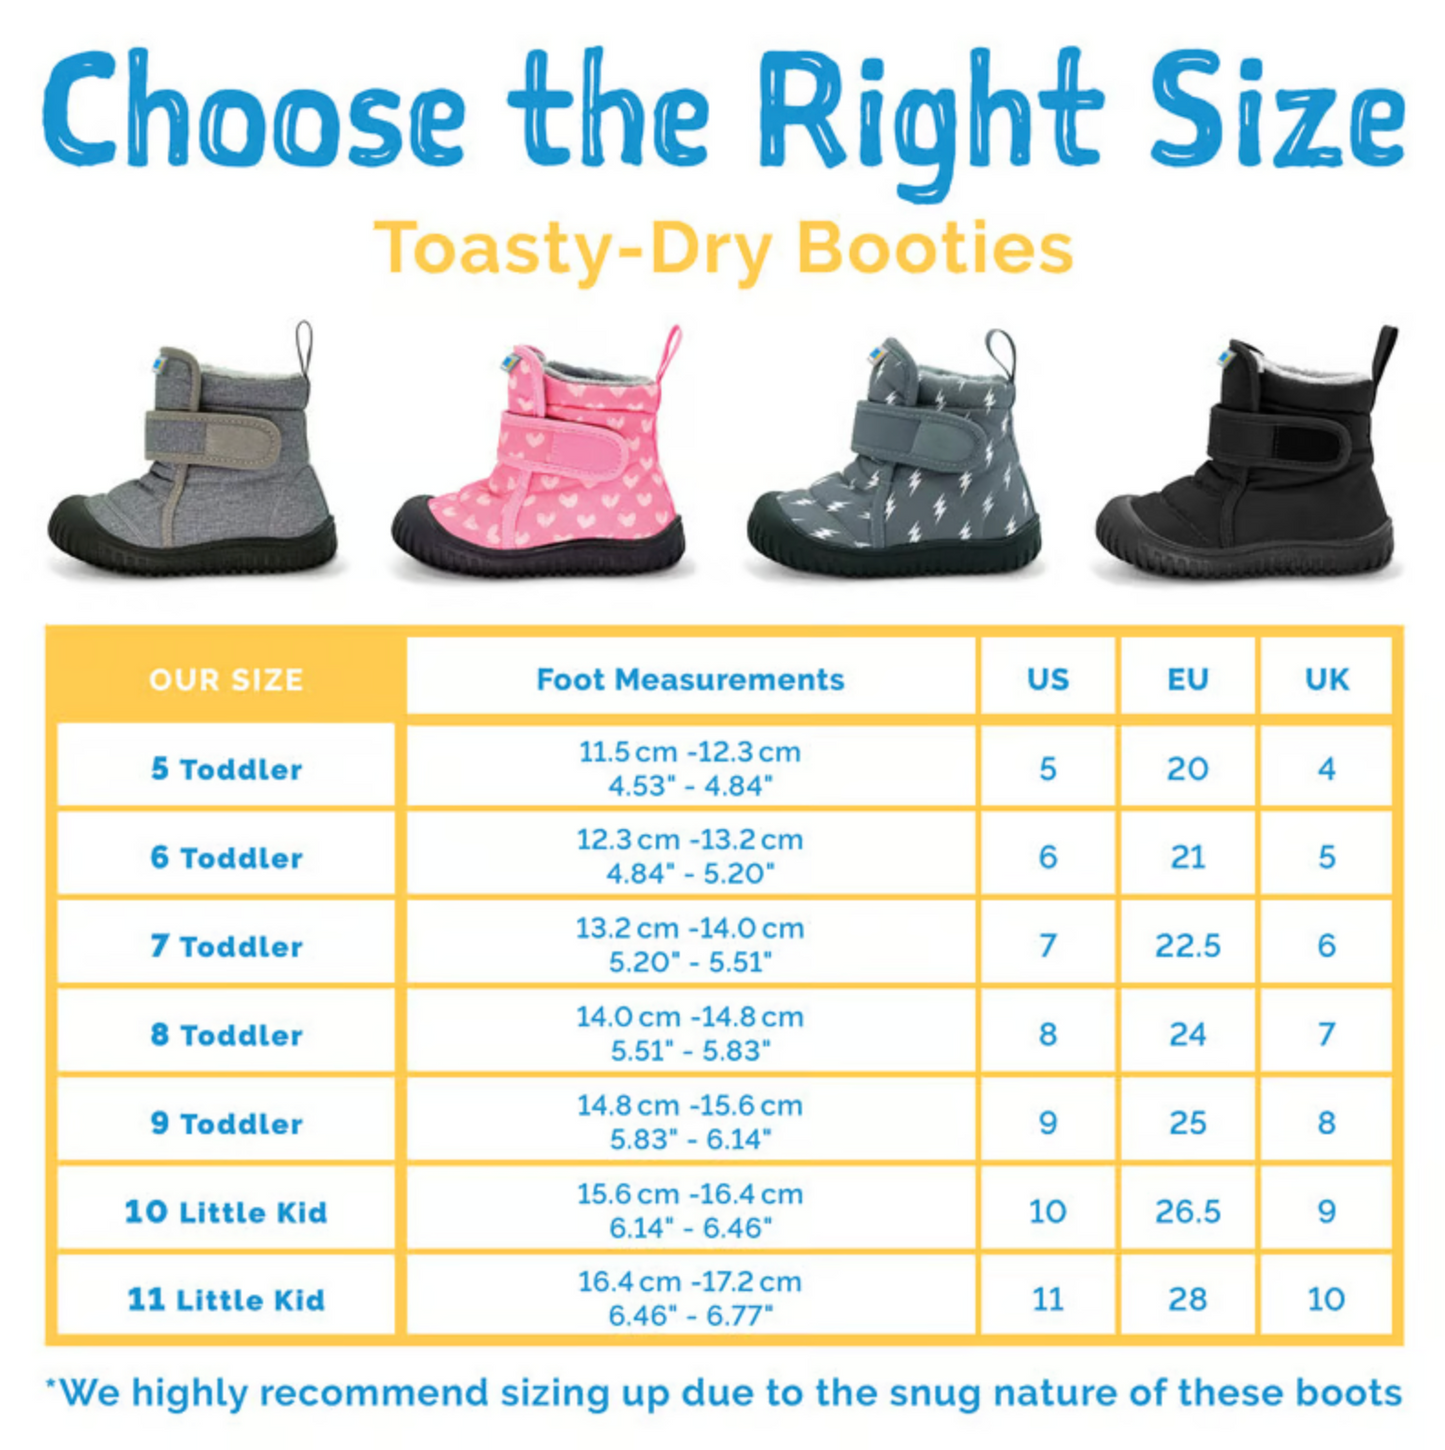 Toasty-Dry Booties Hearts (US 9 Only)